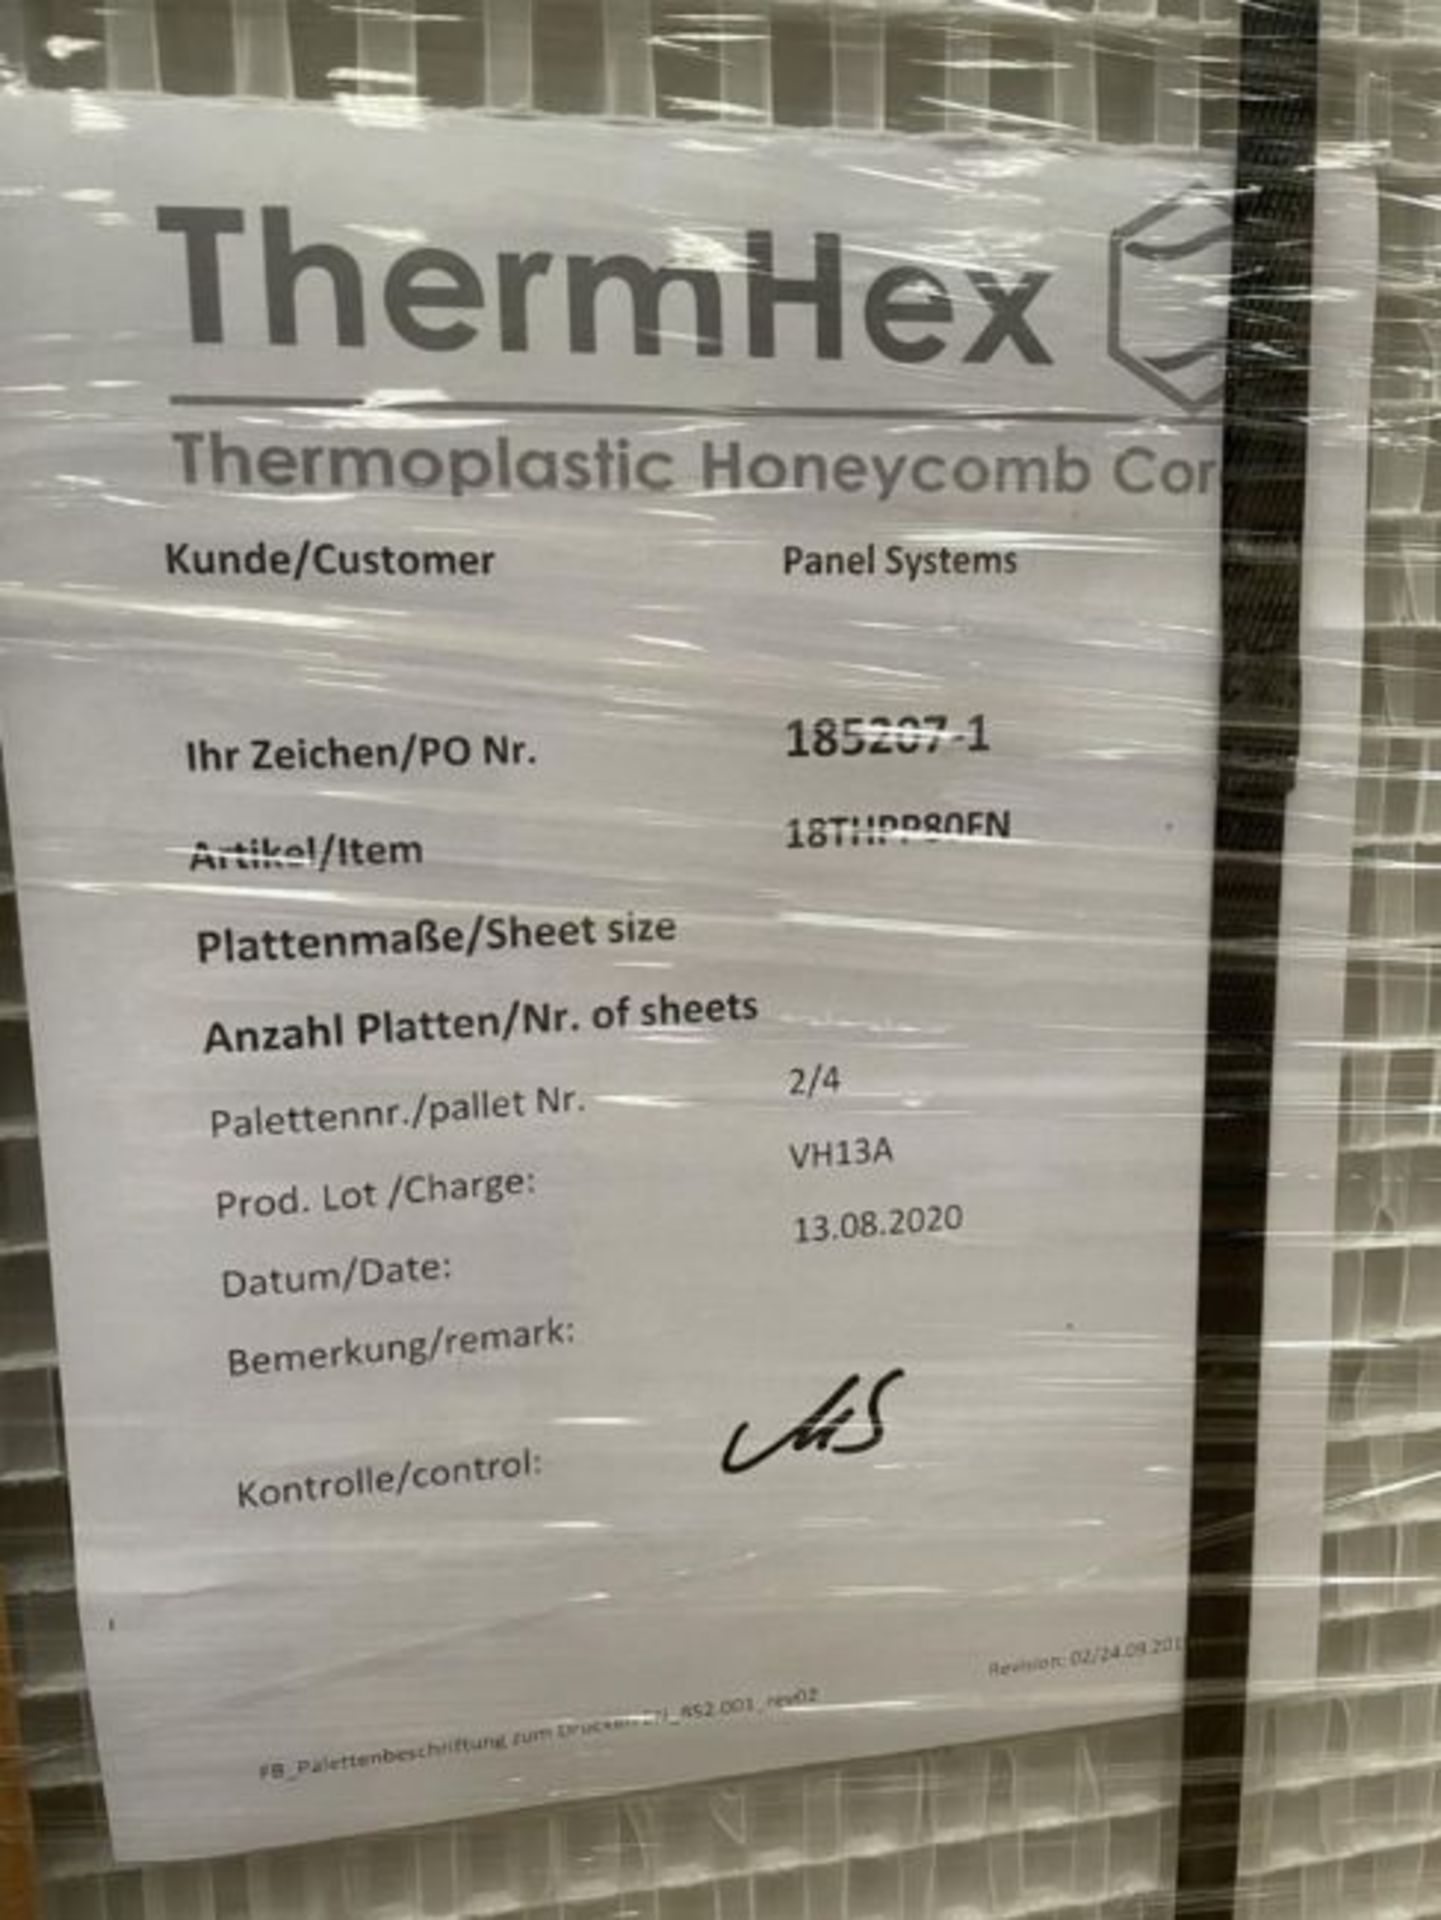 24 x ThermHex Thermoplastic Honeycomb Core Panels - Size 3175 x 1210 x 20mm - New Stock - - Image 3 of 7